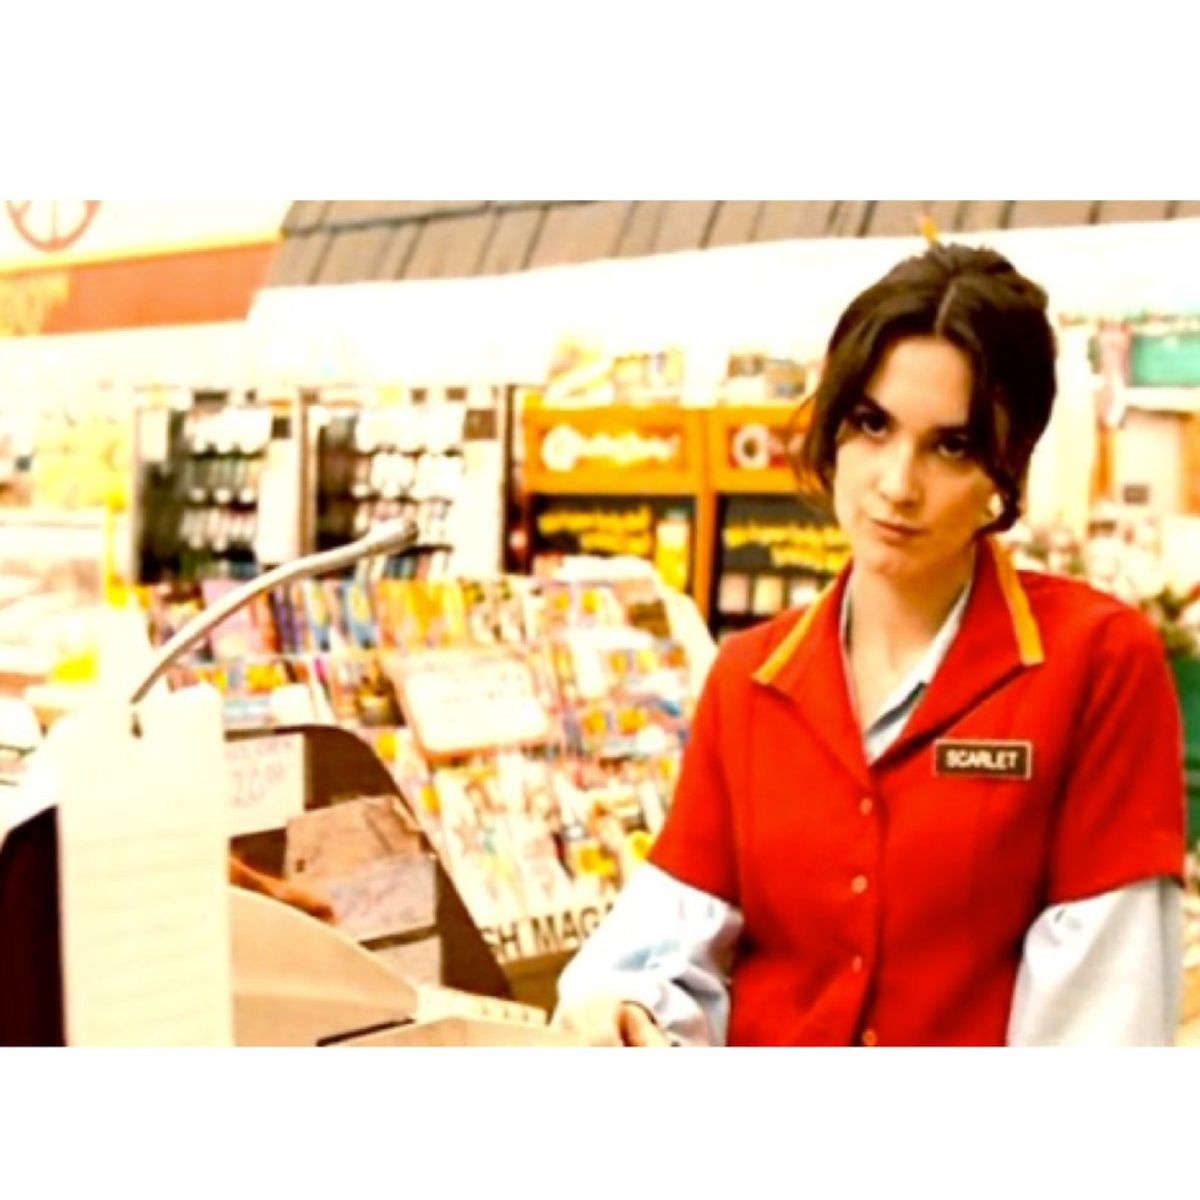 11 Reasons Why Working In Retail Is Frustrating